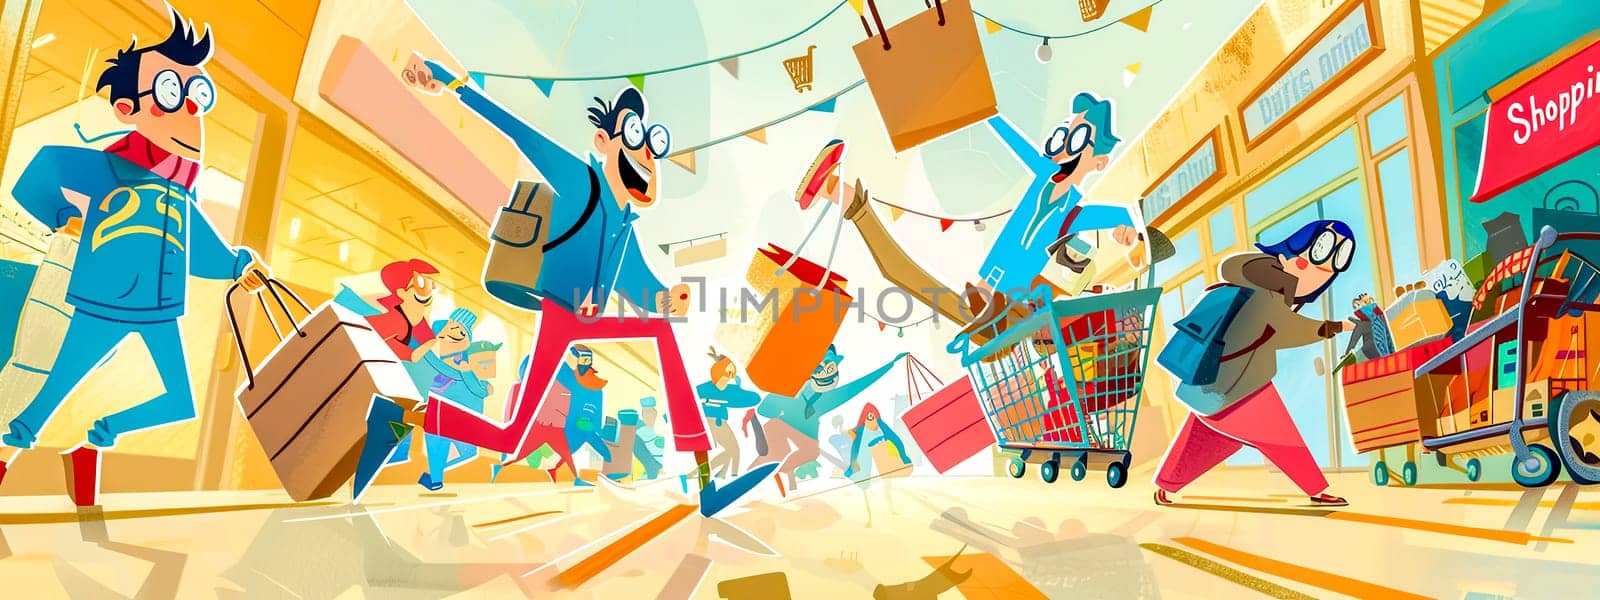 Cartoon illustration of diverse shoppers rushing with bags in a vibrant mall setting